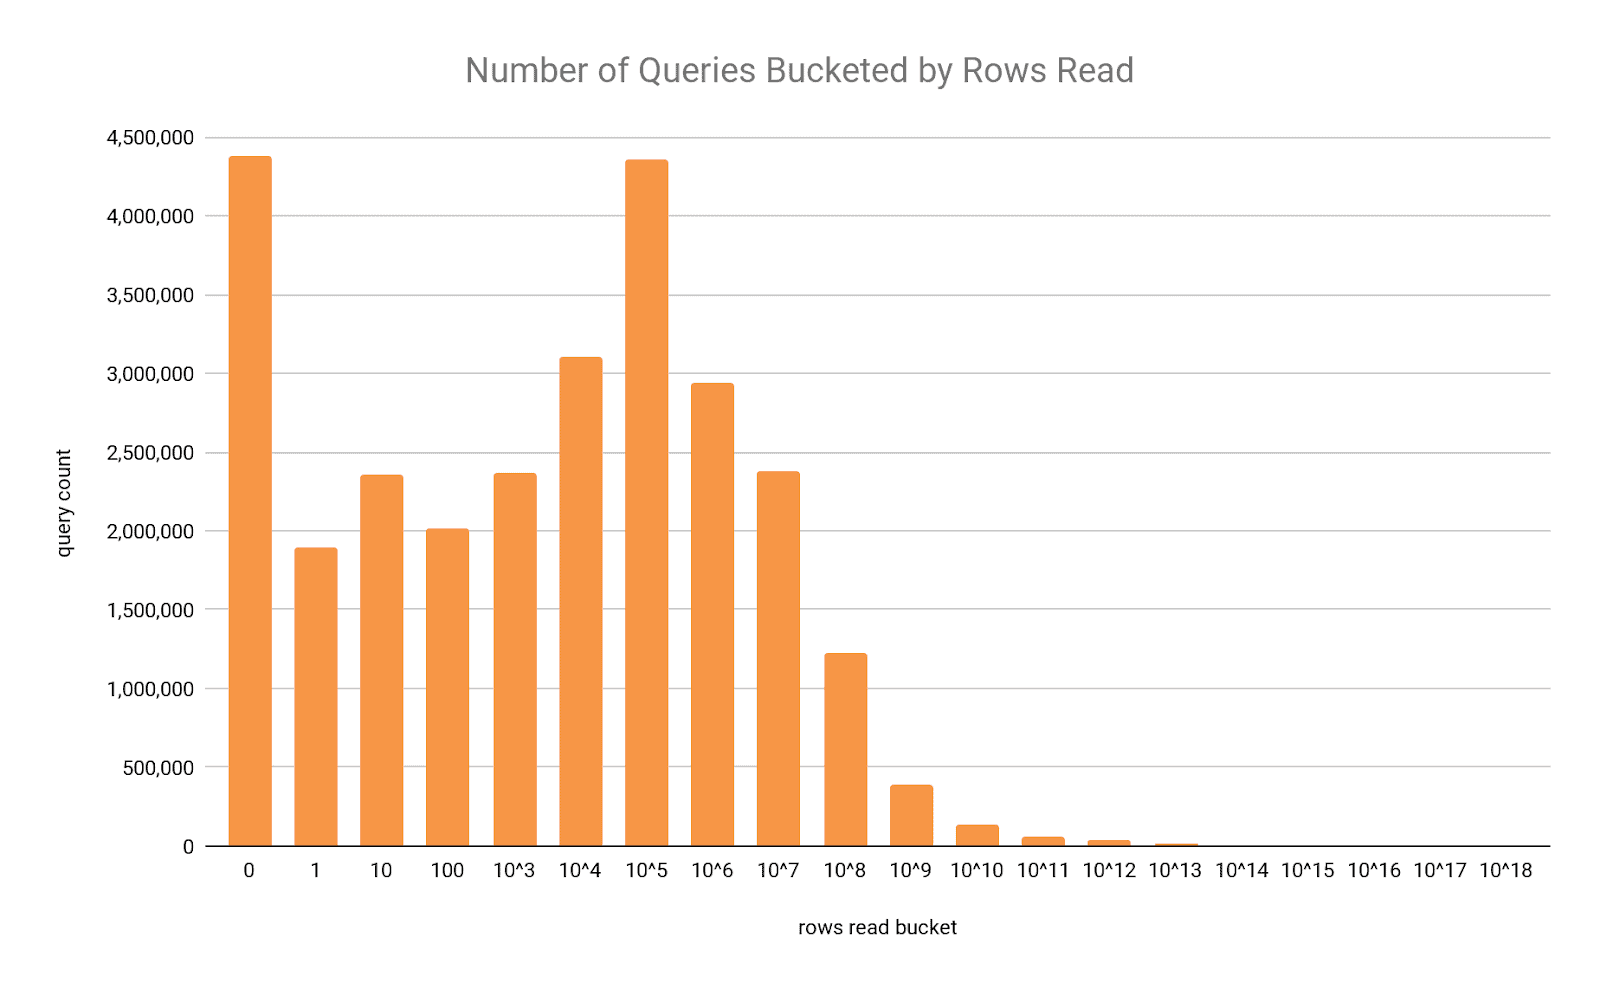 Number of Queries Bucketed By Rows Read